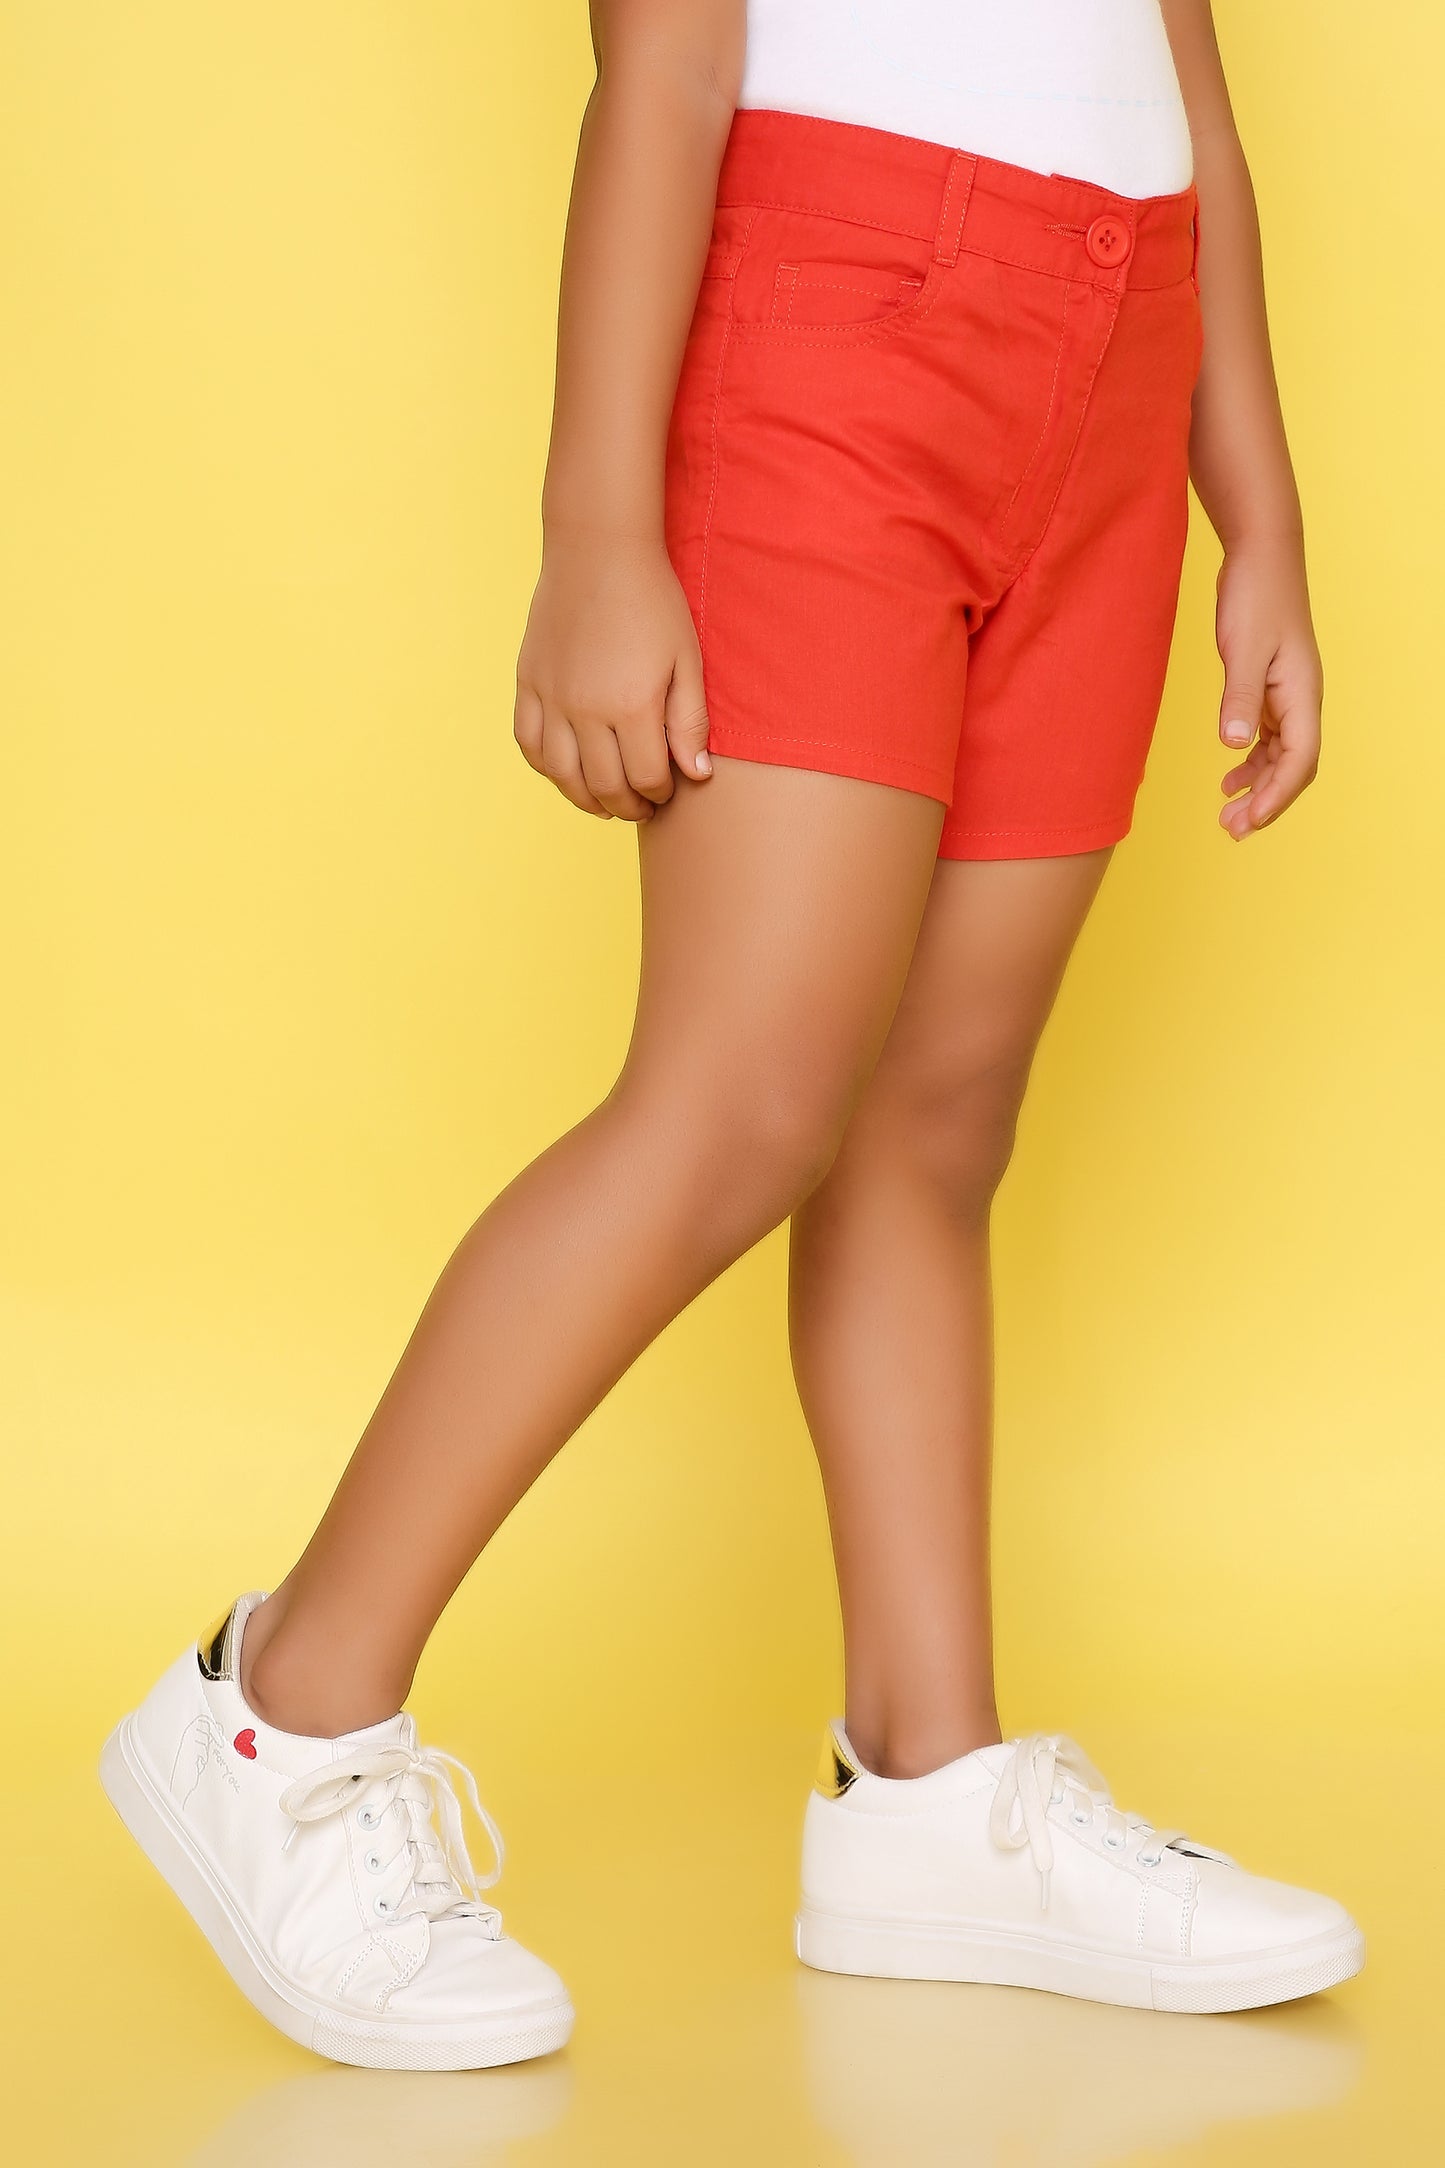 Girls' Shorts with Adjustable Waist- Red